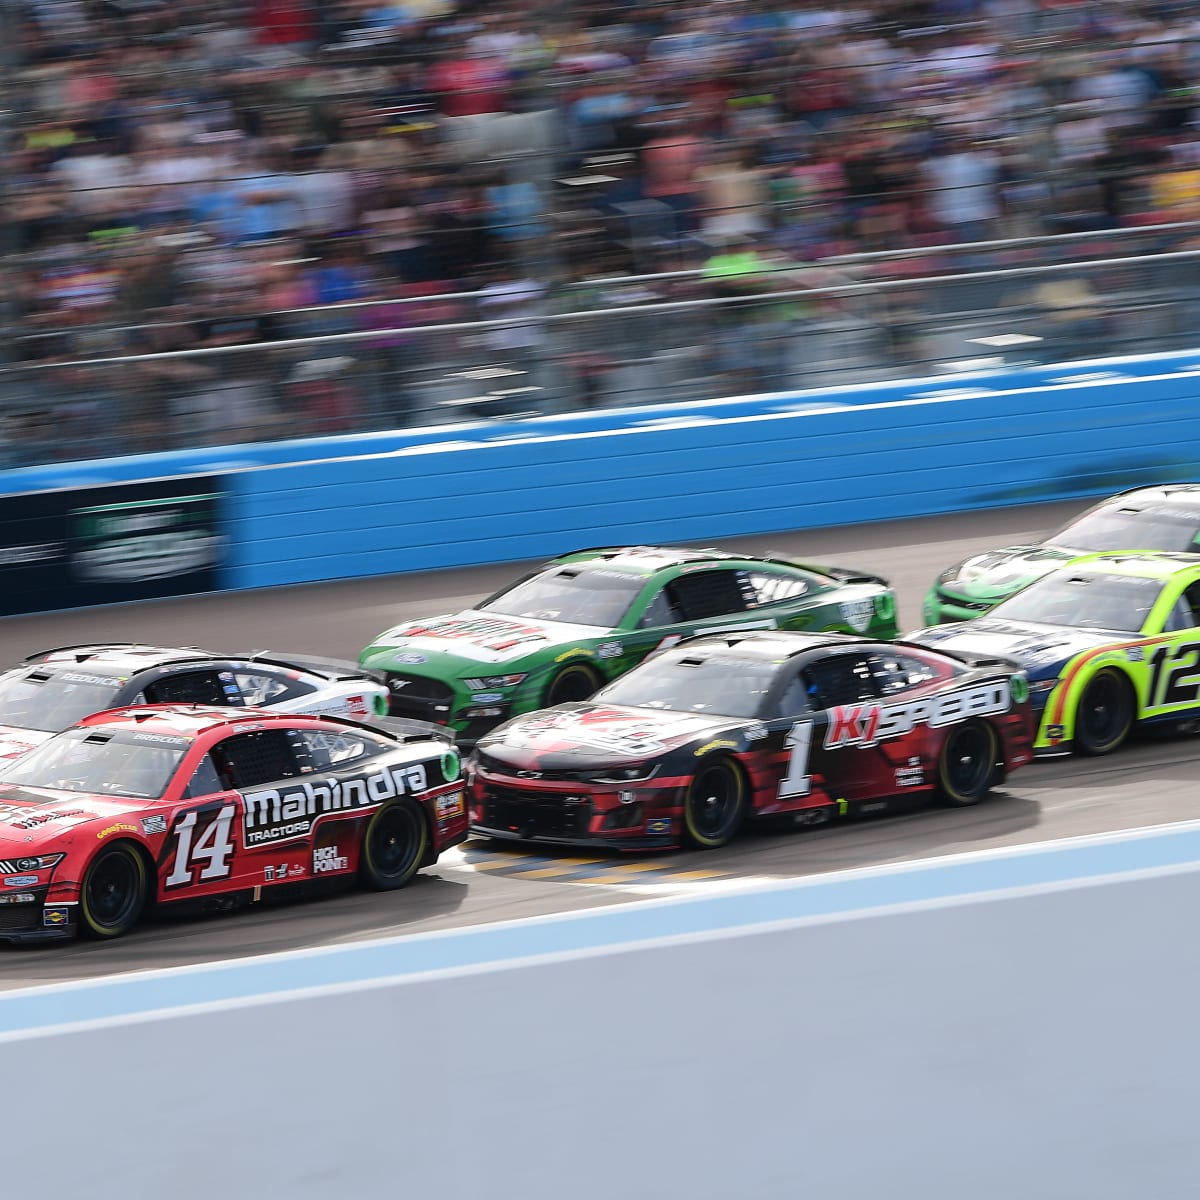 Folds of Honor QuikTrip 500 Live Stream Watch Online, TV Channel, Start Time - How to Watch and Stream Major League and College Sports